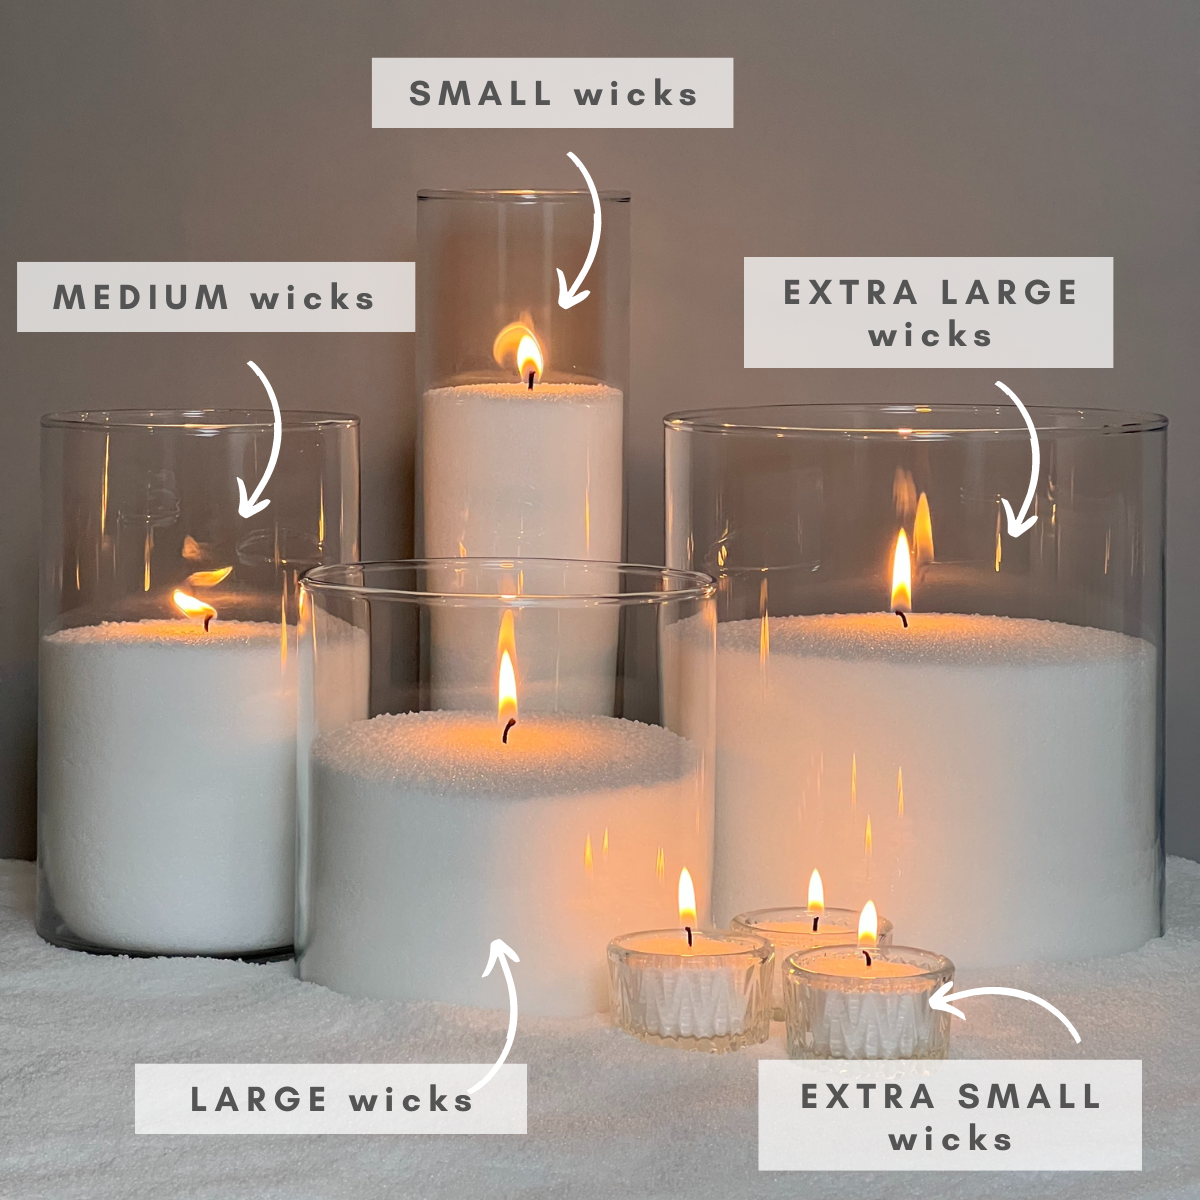 Wicks sizes Different Wicks thickness Wicks Extra Small Small Medium Large Extra Large Wicks Candle Sand Wax Sand Candle Pearled Candle